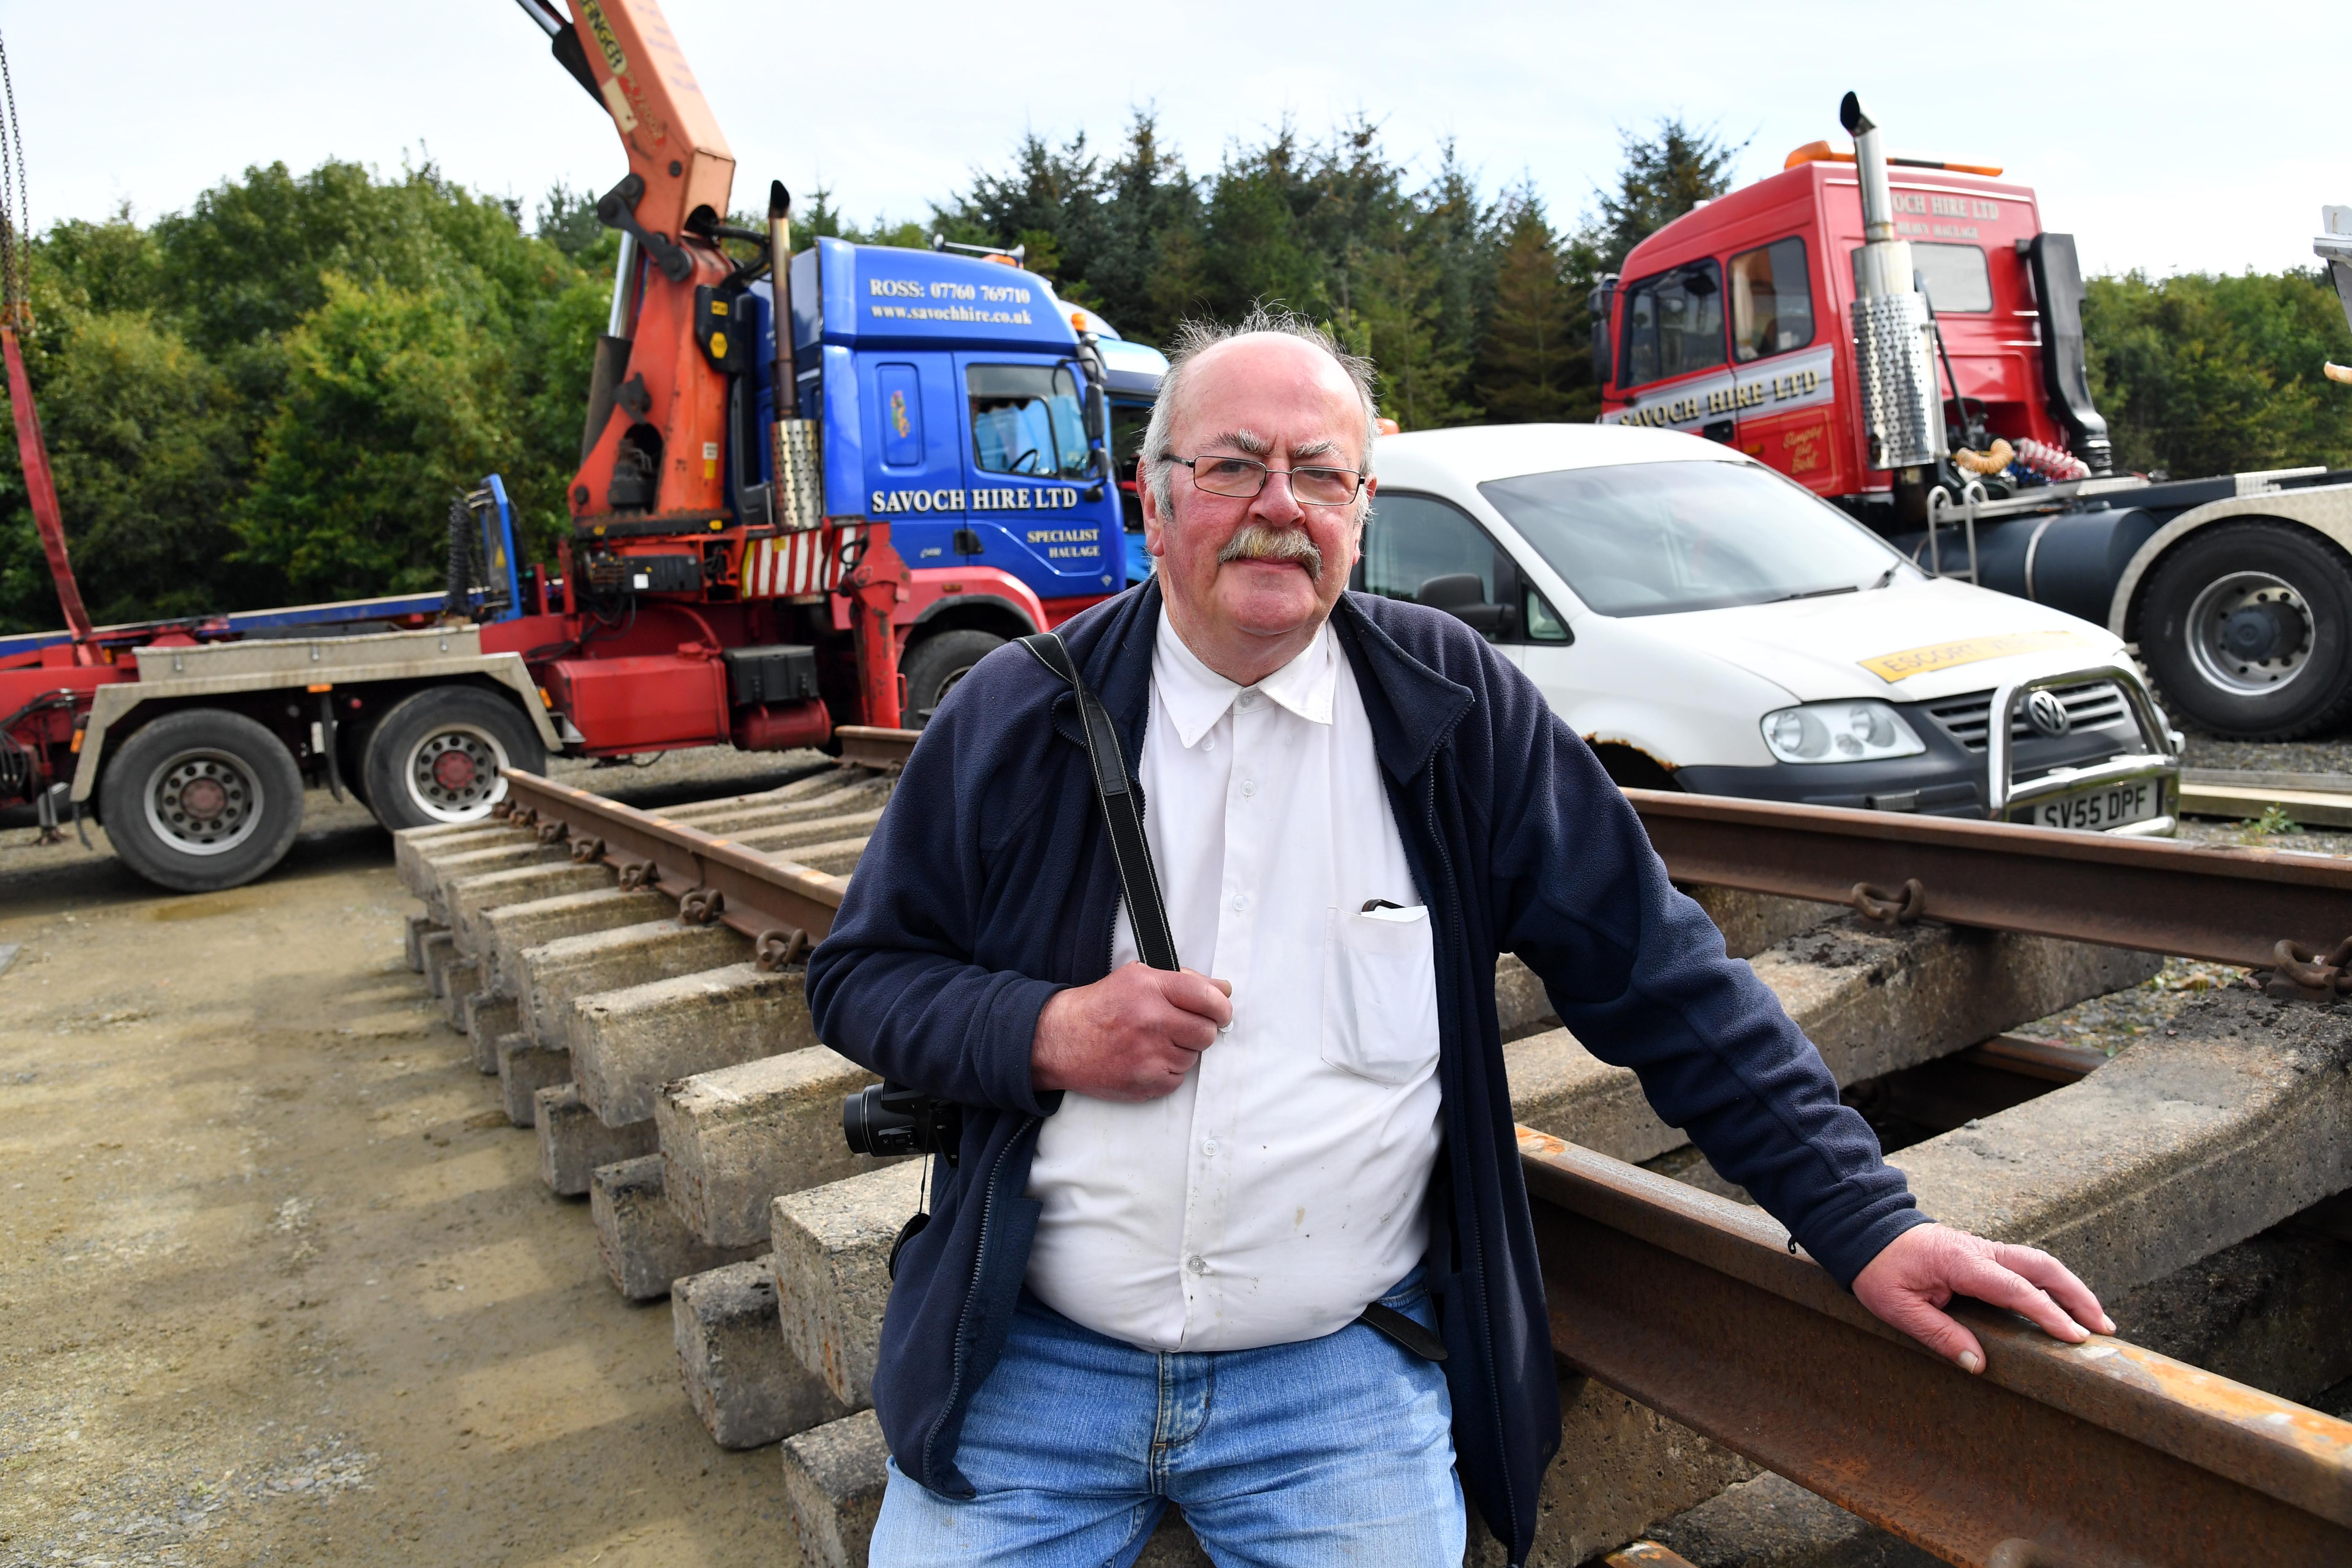 Alan Sangster, a trustee of the Maud Railway Museum, welcomes the arrival of two lengths of railway track.